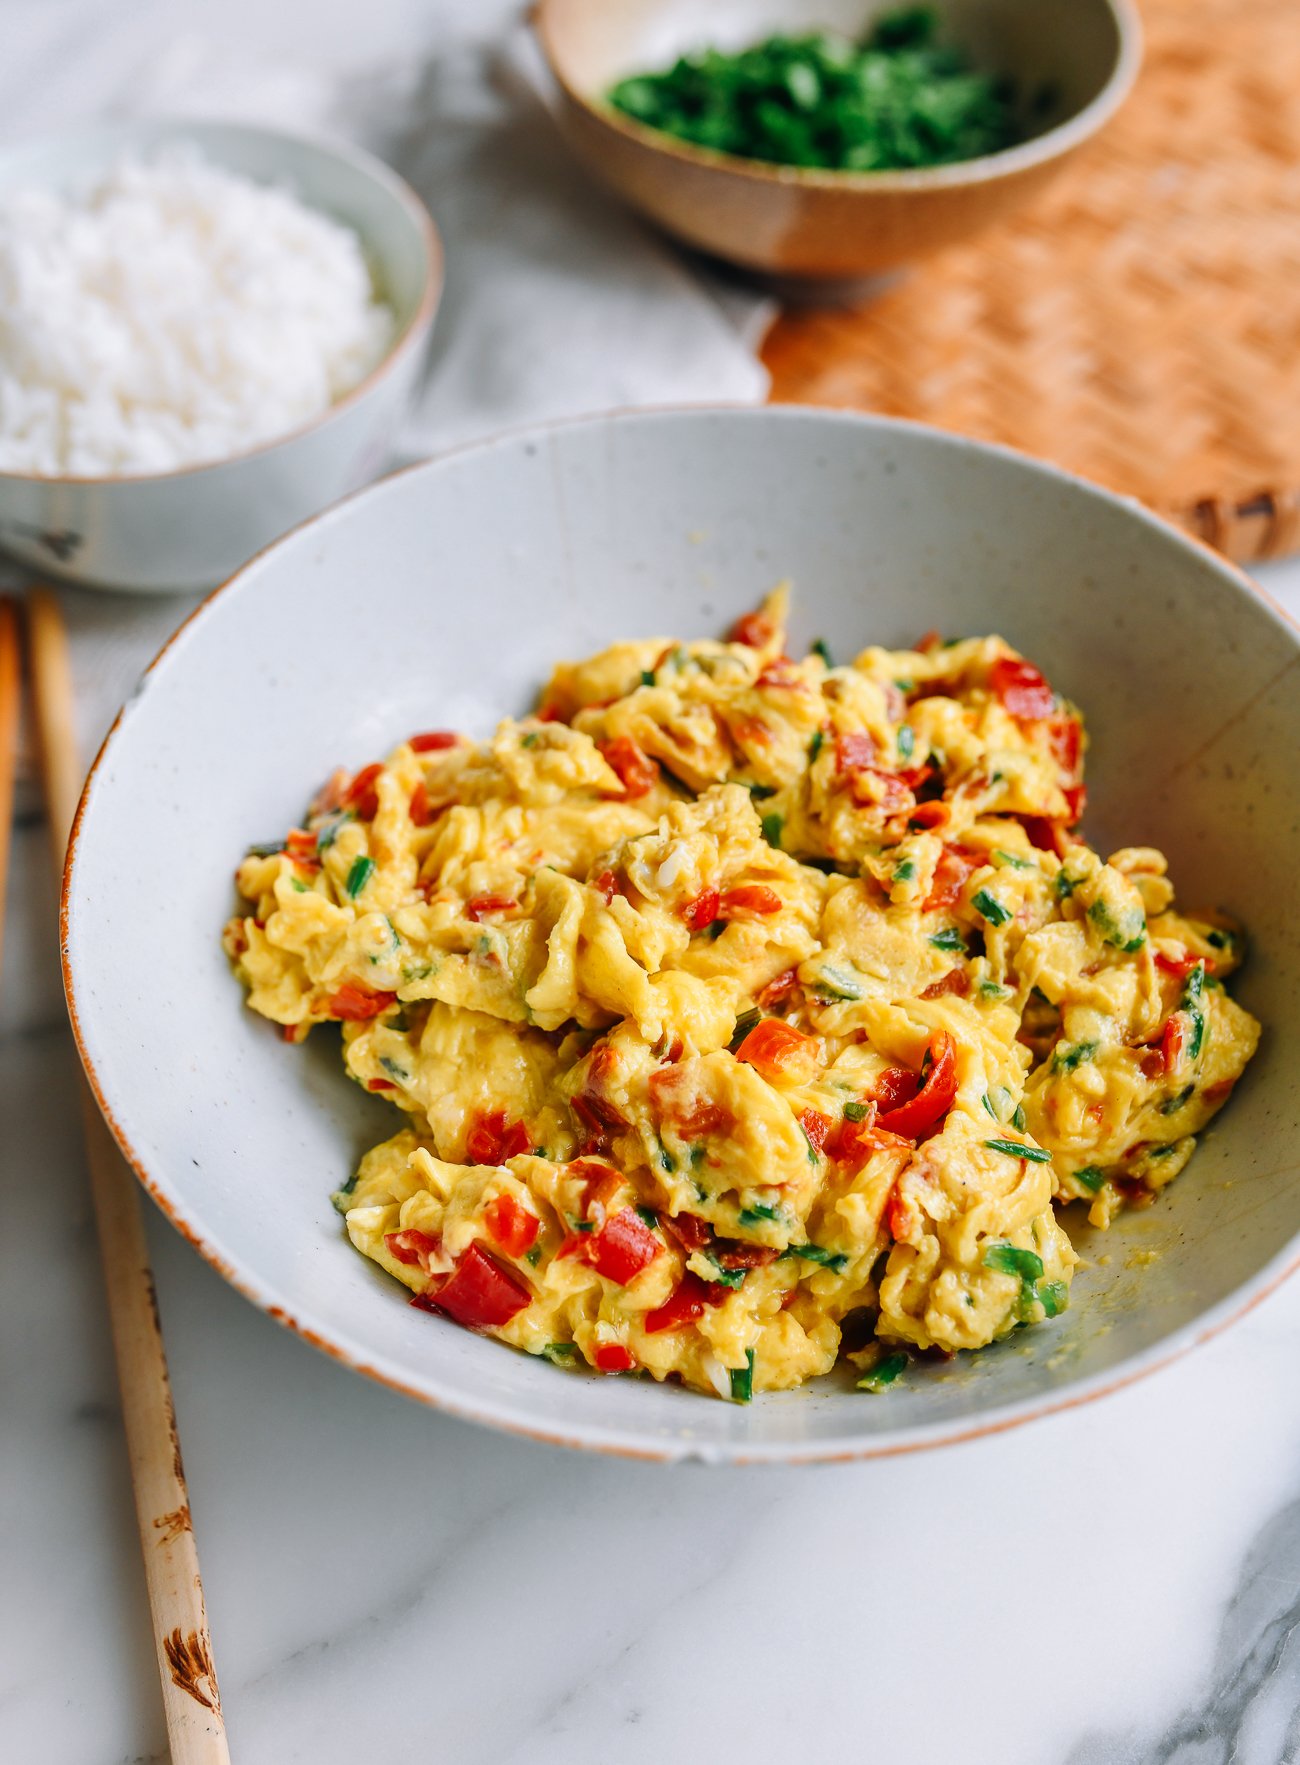 Fluffy Chinese Scrambled Eggs with Chives and Duo Jiao